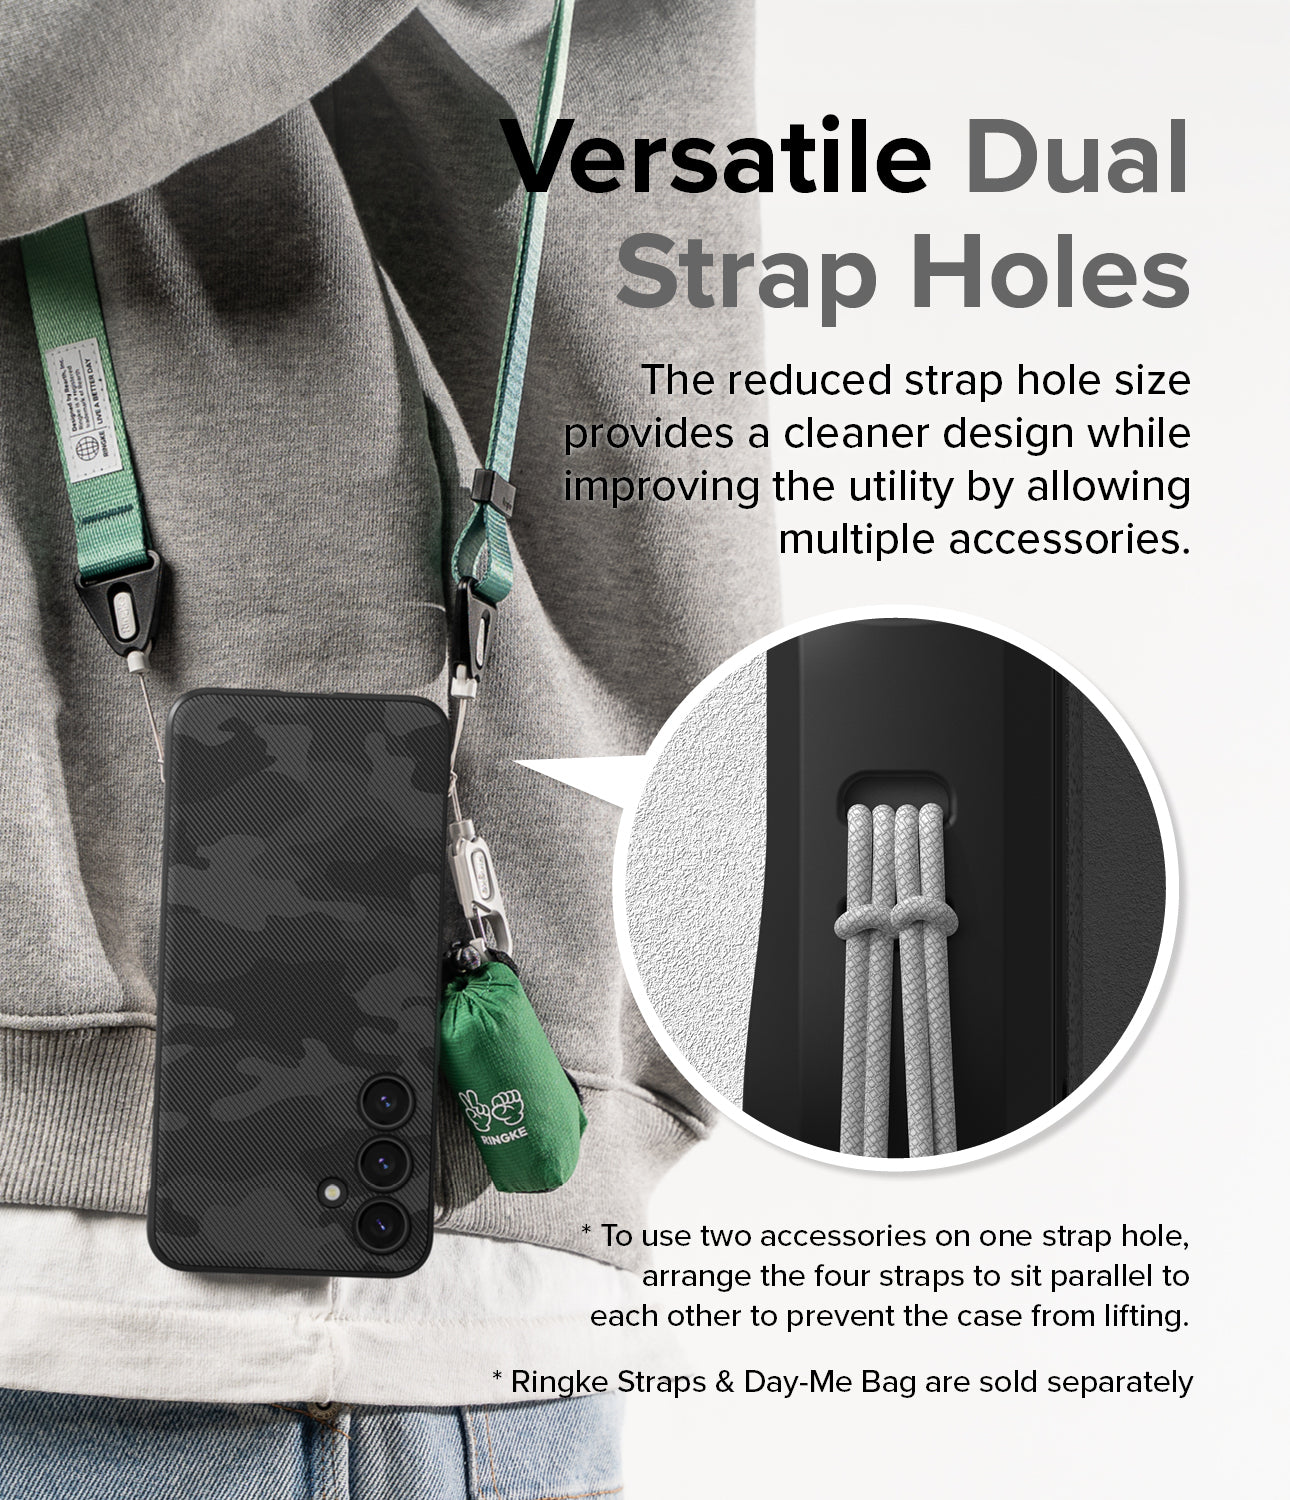 Galaxy S24 Plus Case | Onyx Design - Versatile Dual Strap Holes. The reduced strap hole size provides a cleaner design while improving the utility by allowing multiple accessories.